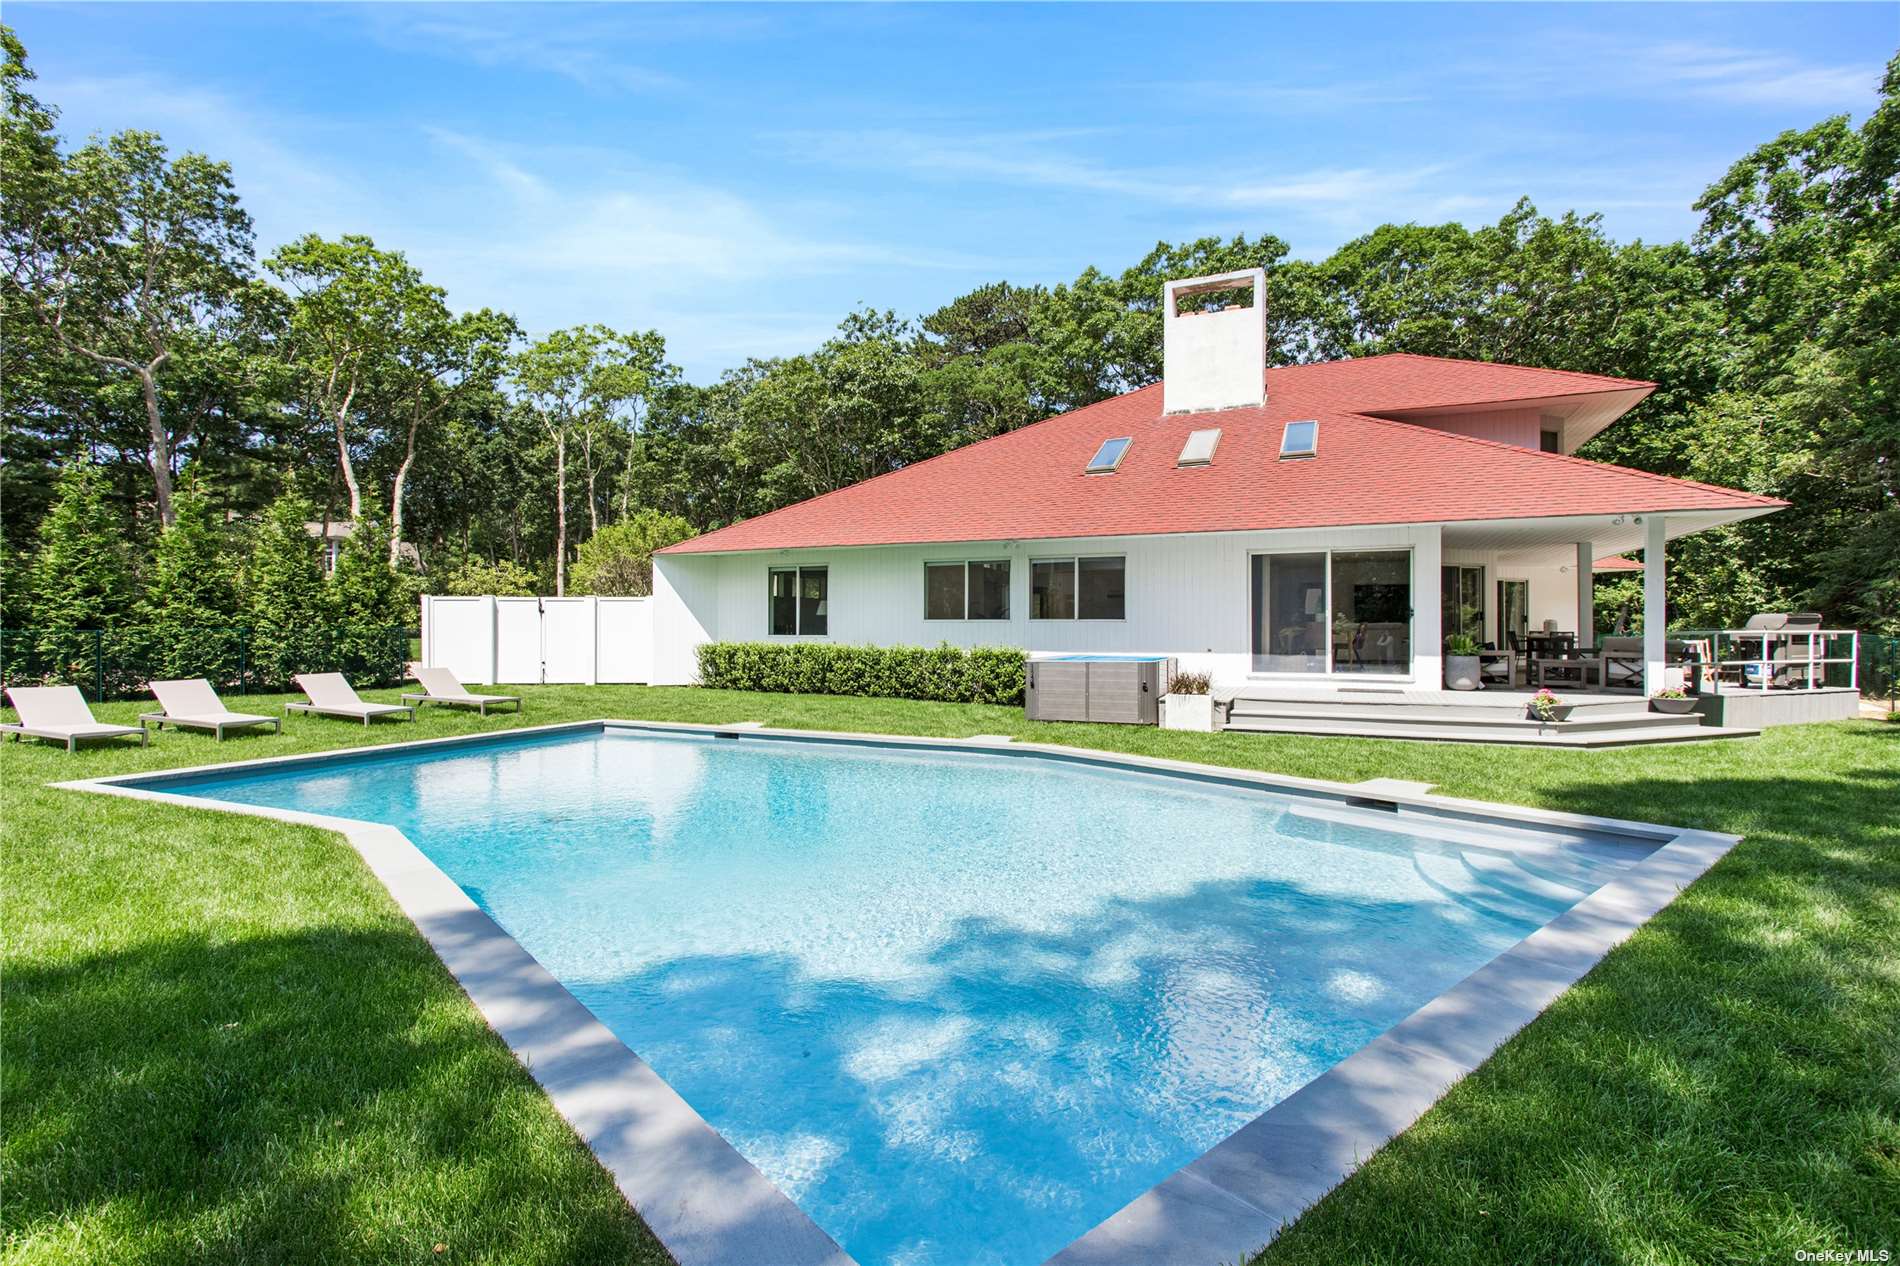 House in Quogue - Lakewood  Suffolk, NY 11959